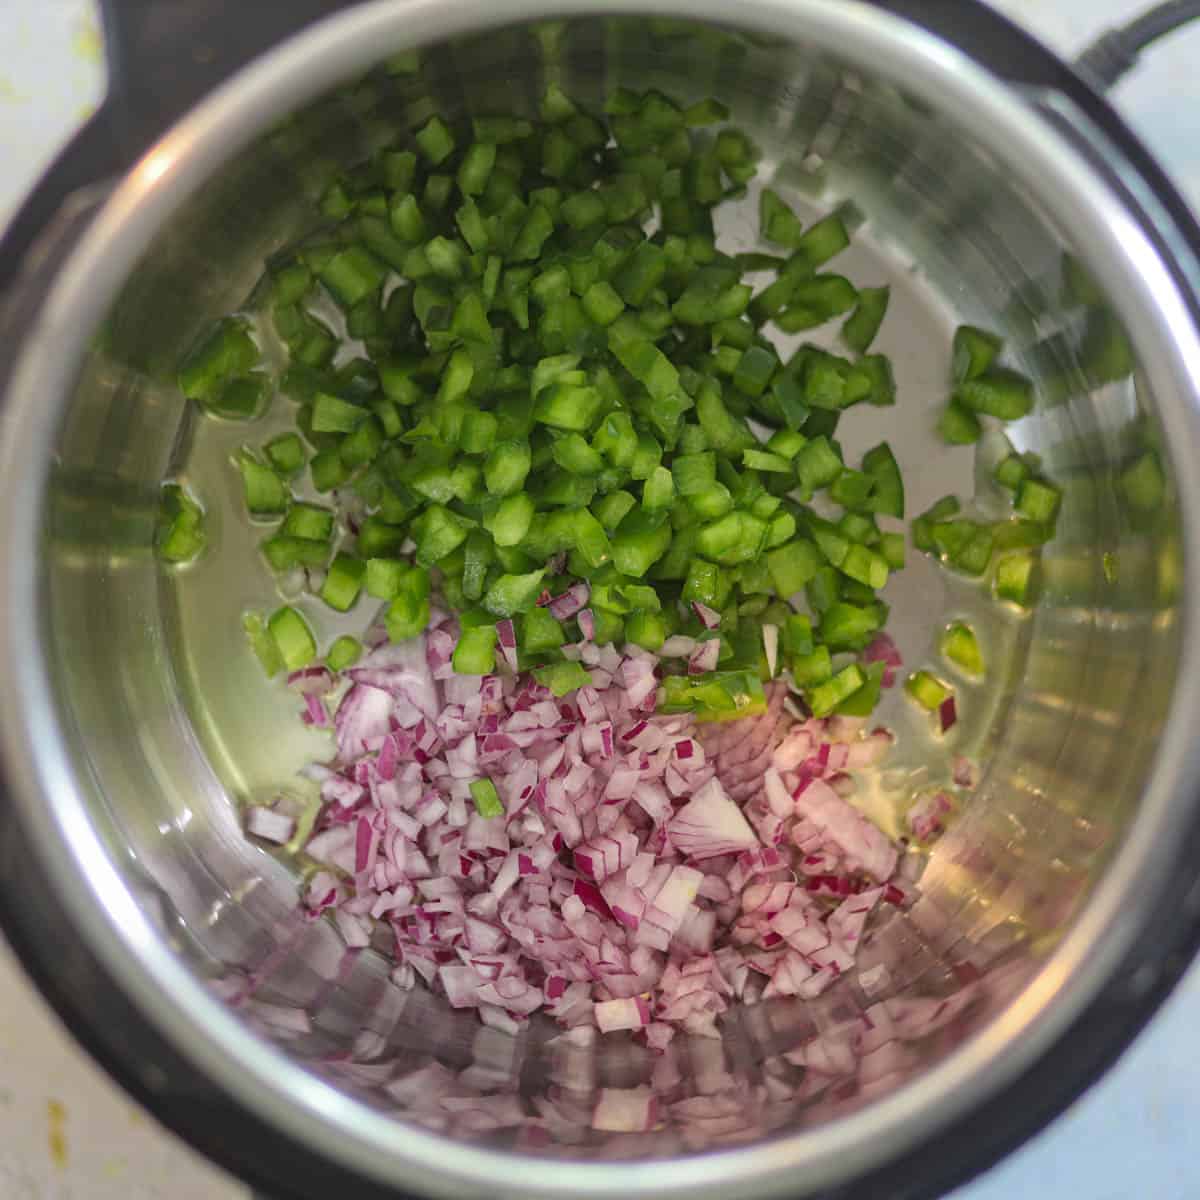 add onion and bell peppers in the Instant pot.